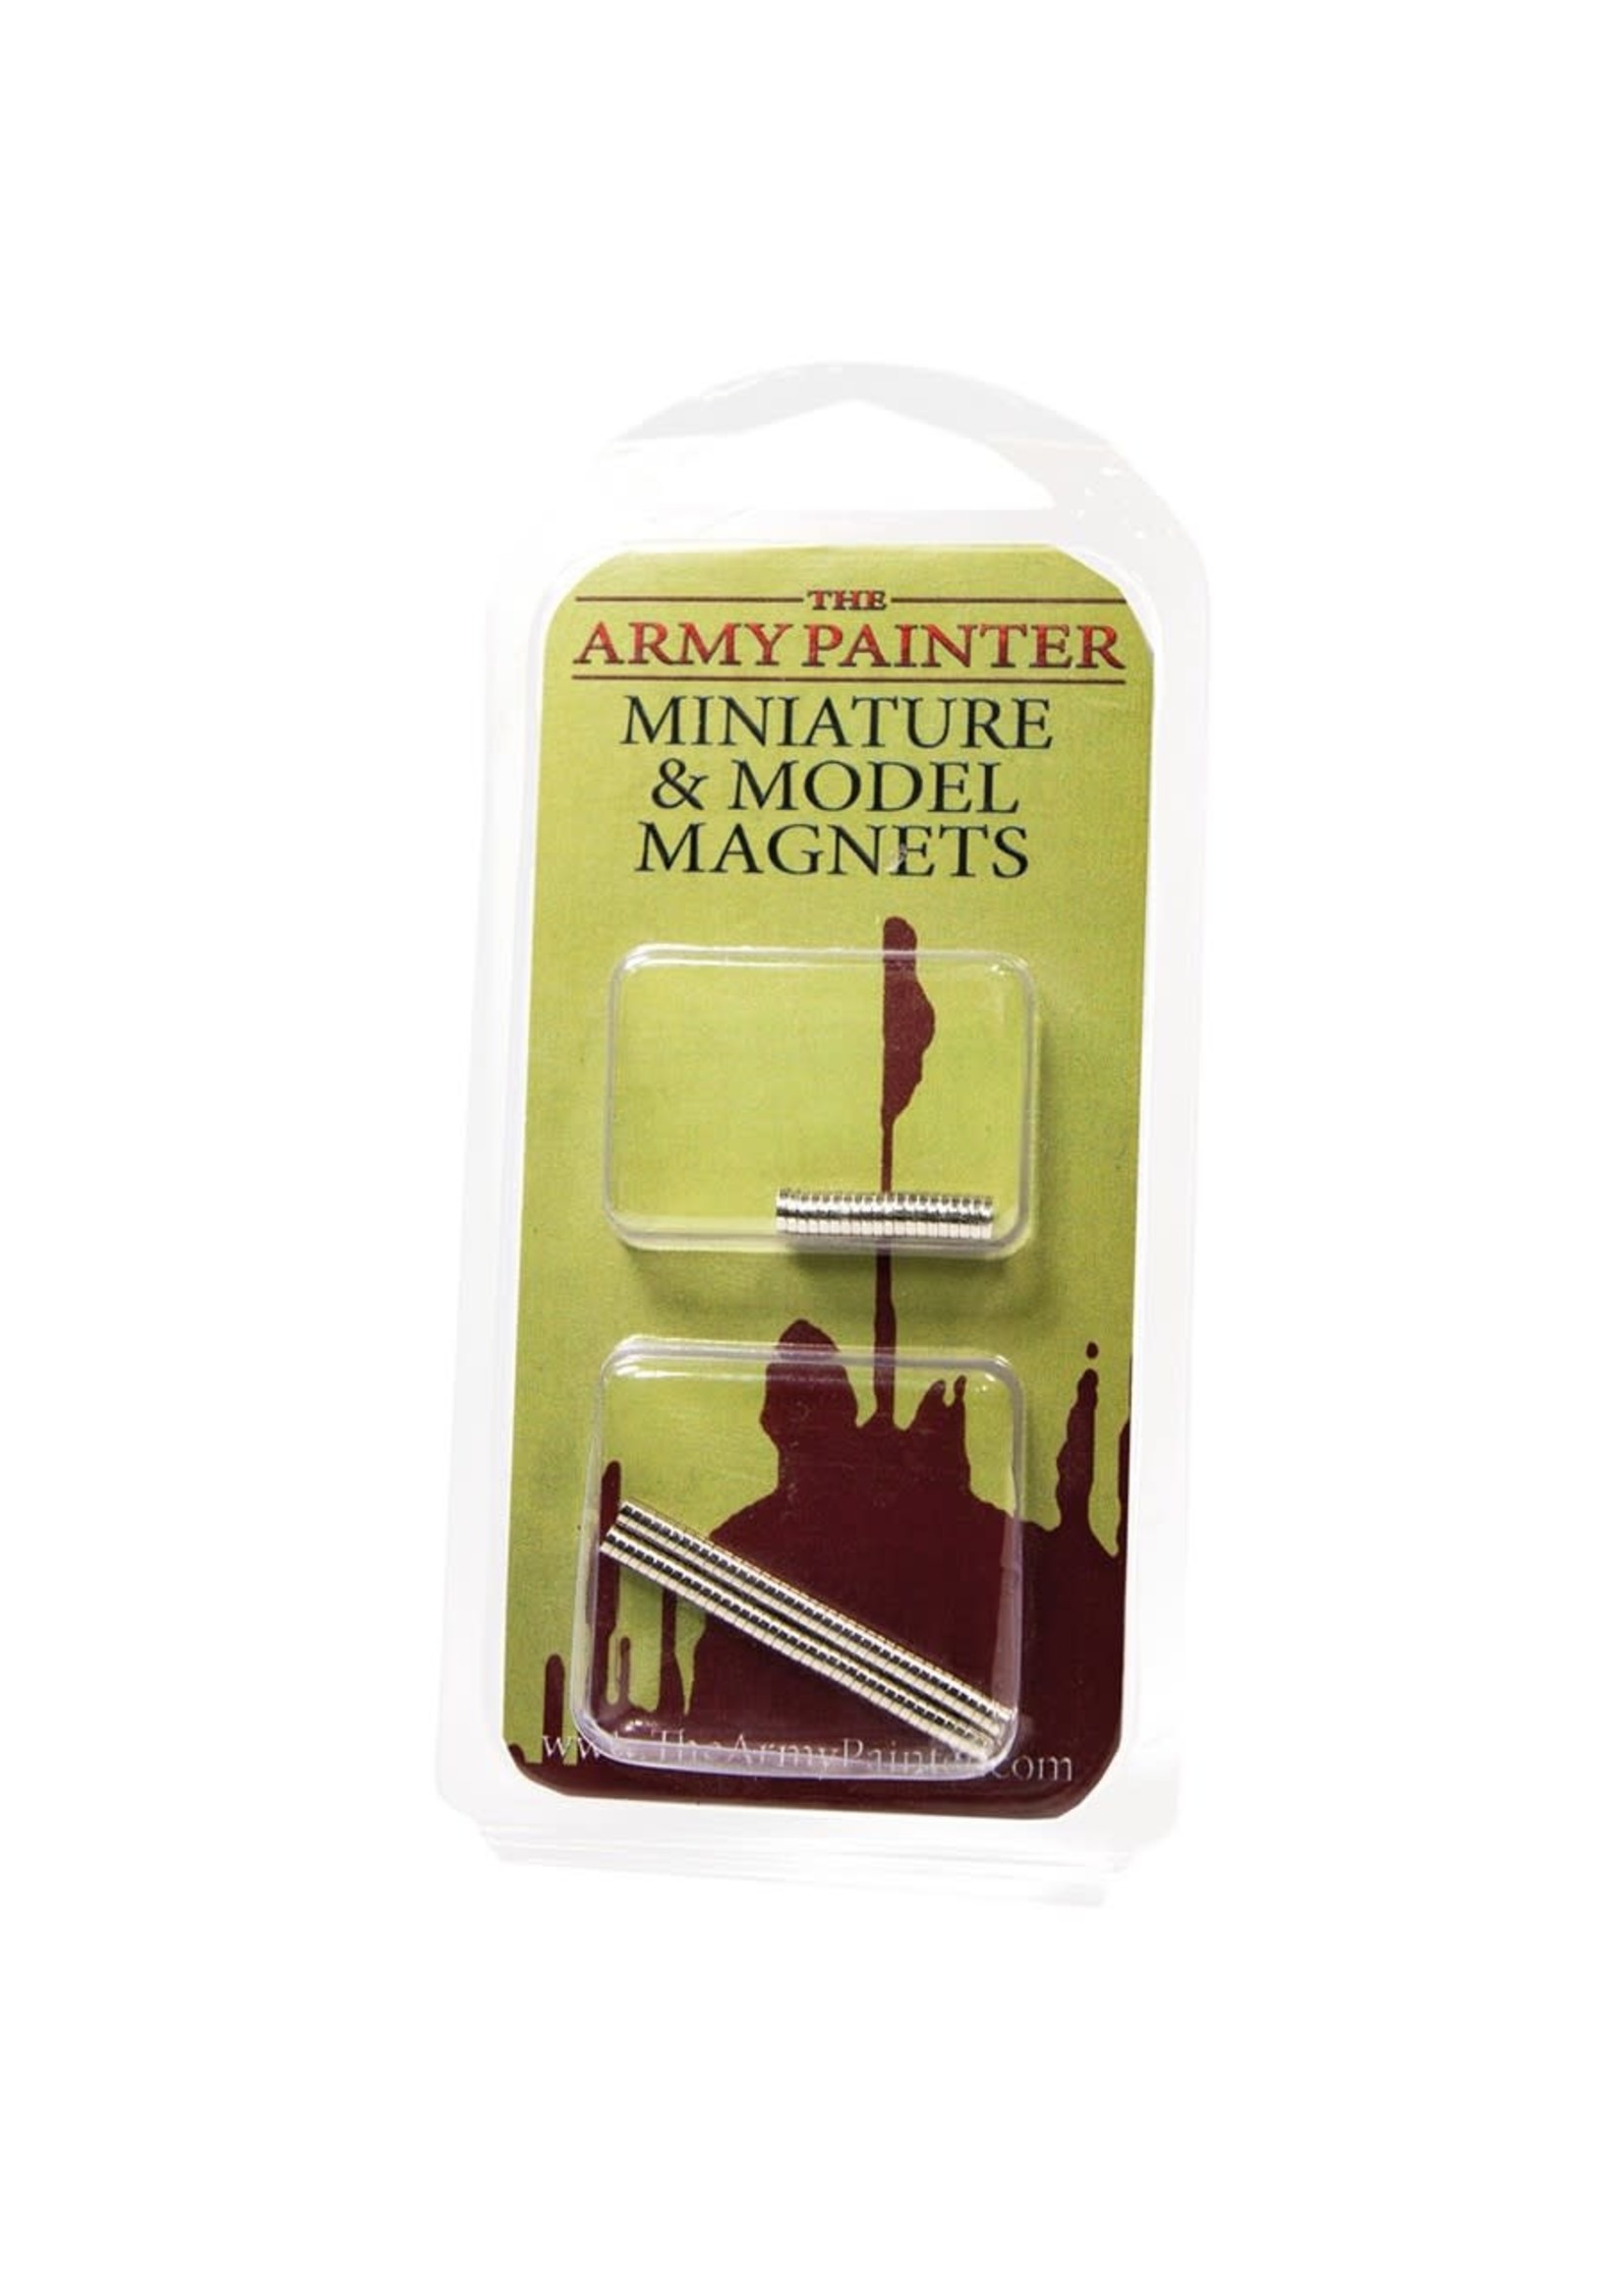 The Army Painter Tools: Miniature & Model Magnets